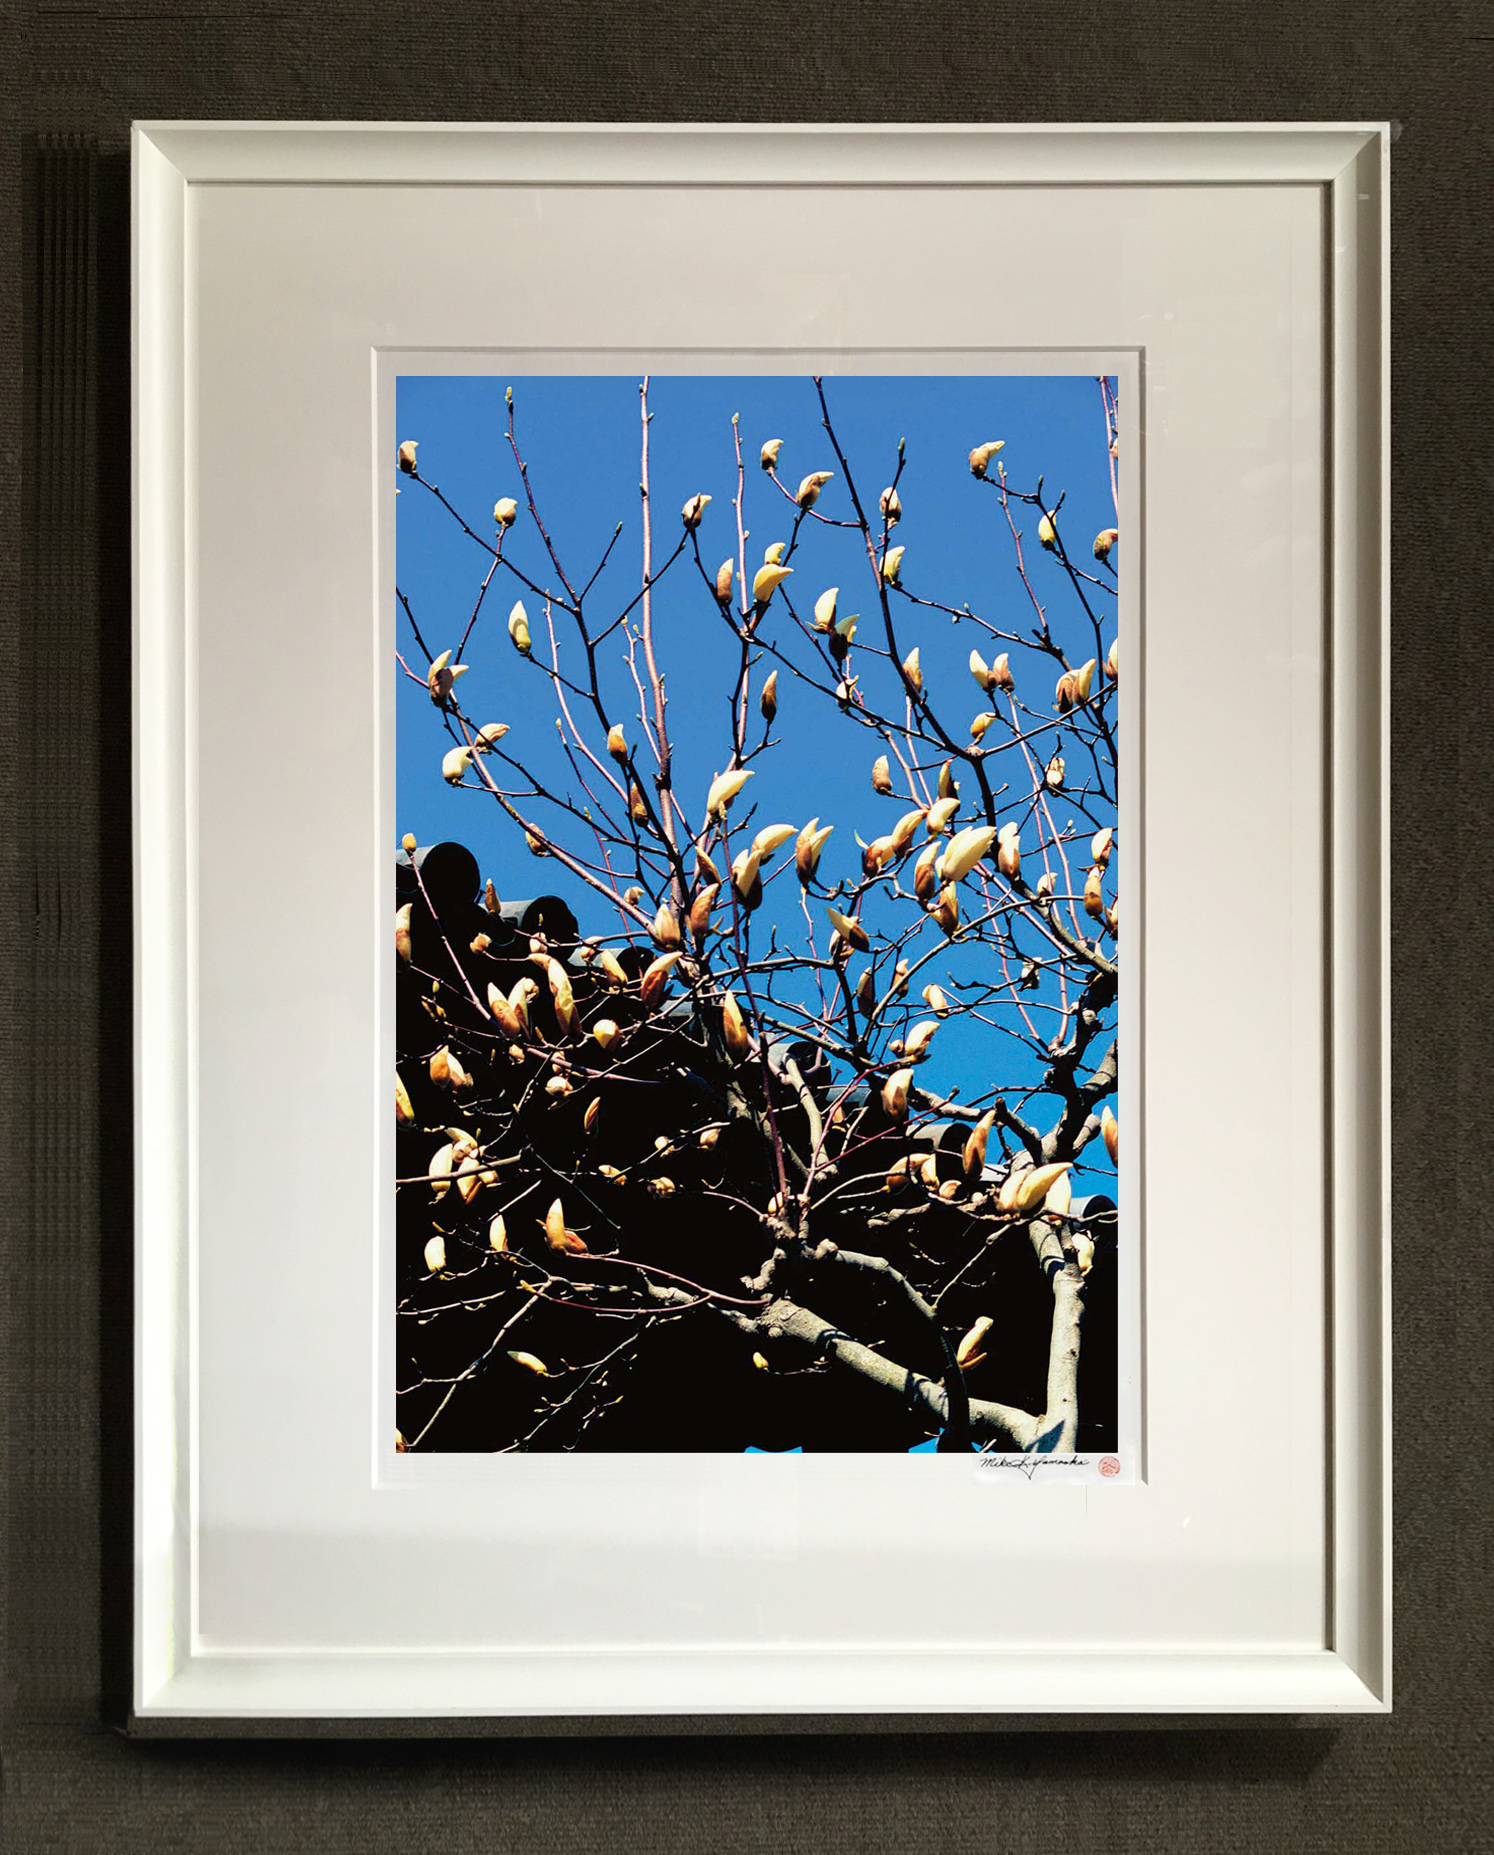 "Magnolia buds at Seta Castle" in white frame with indentations at the inner and outer edges.